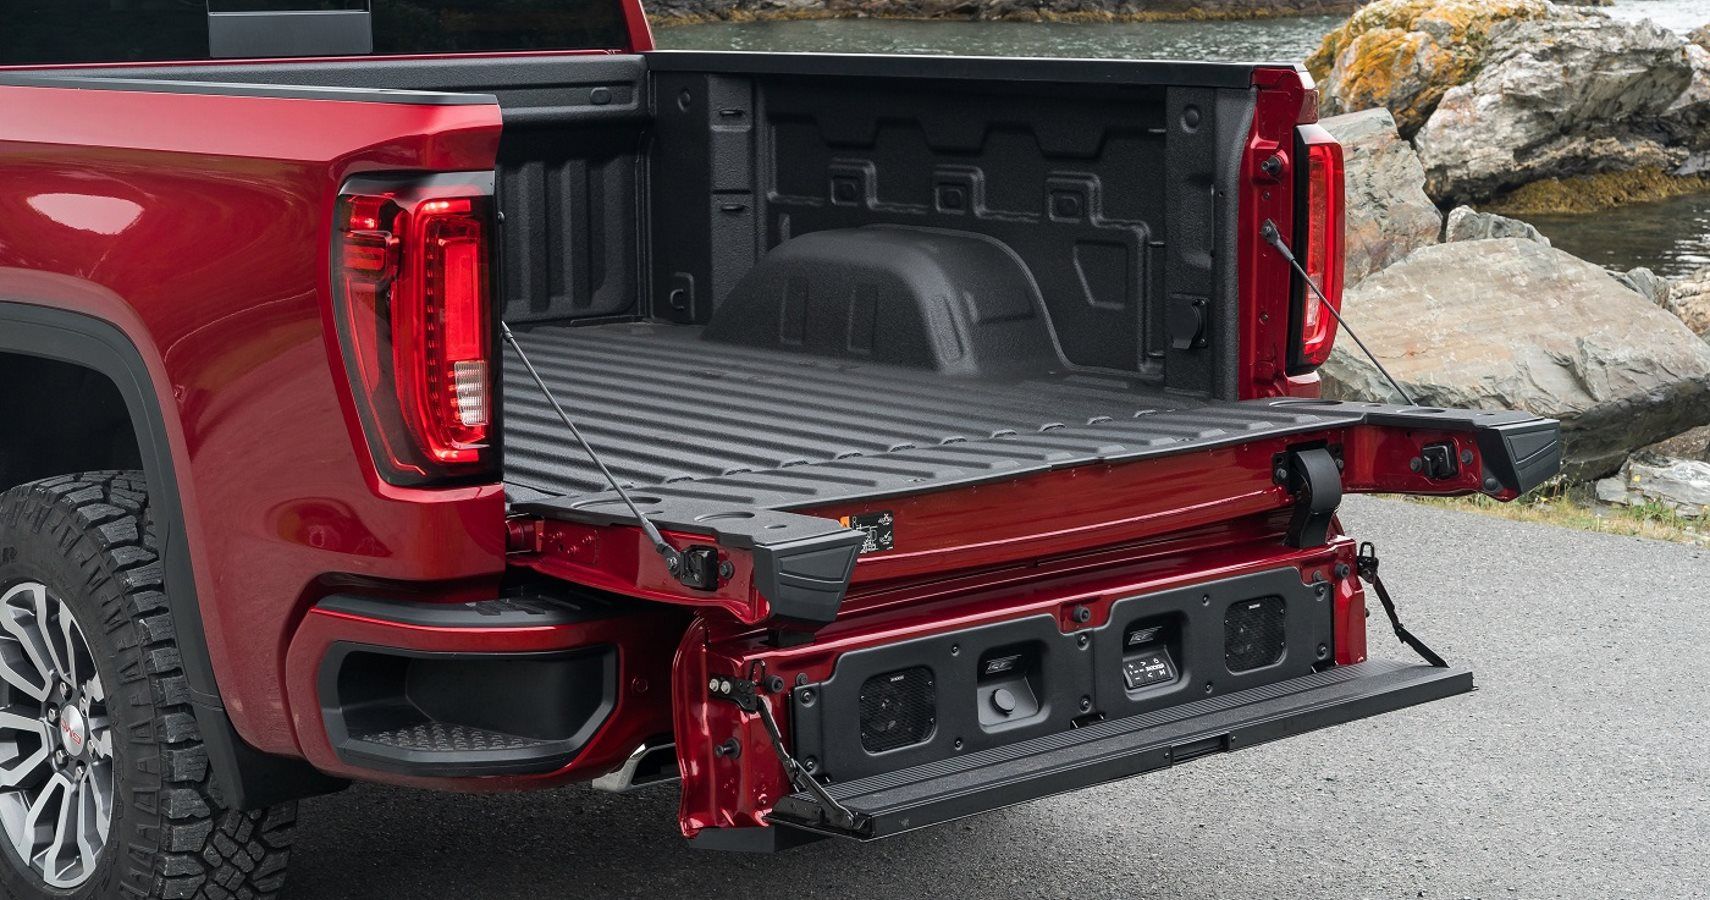 Ram Might Be Getting Its Own Fancy Tailgate To Take On GMC